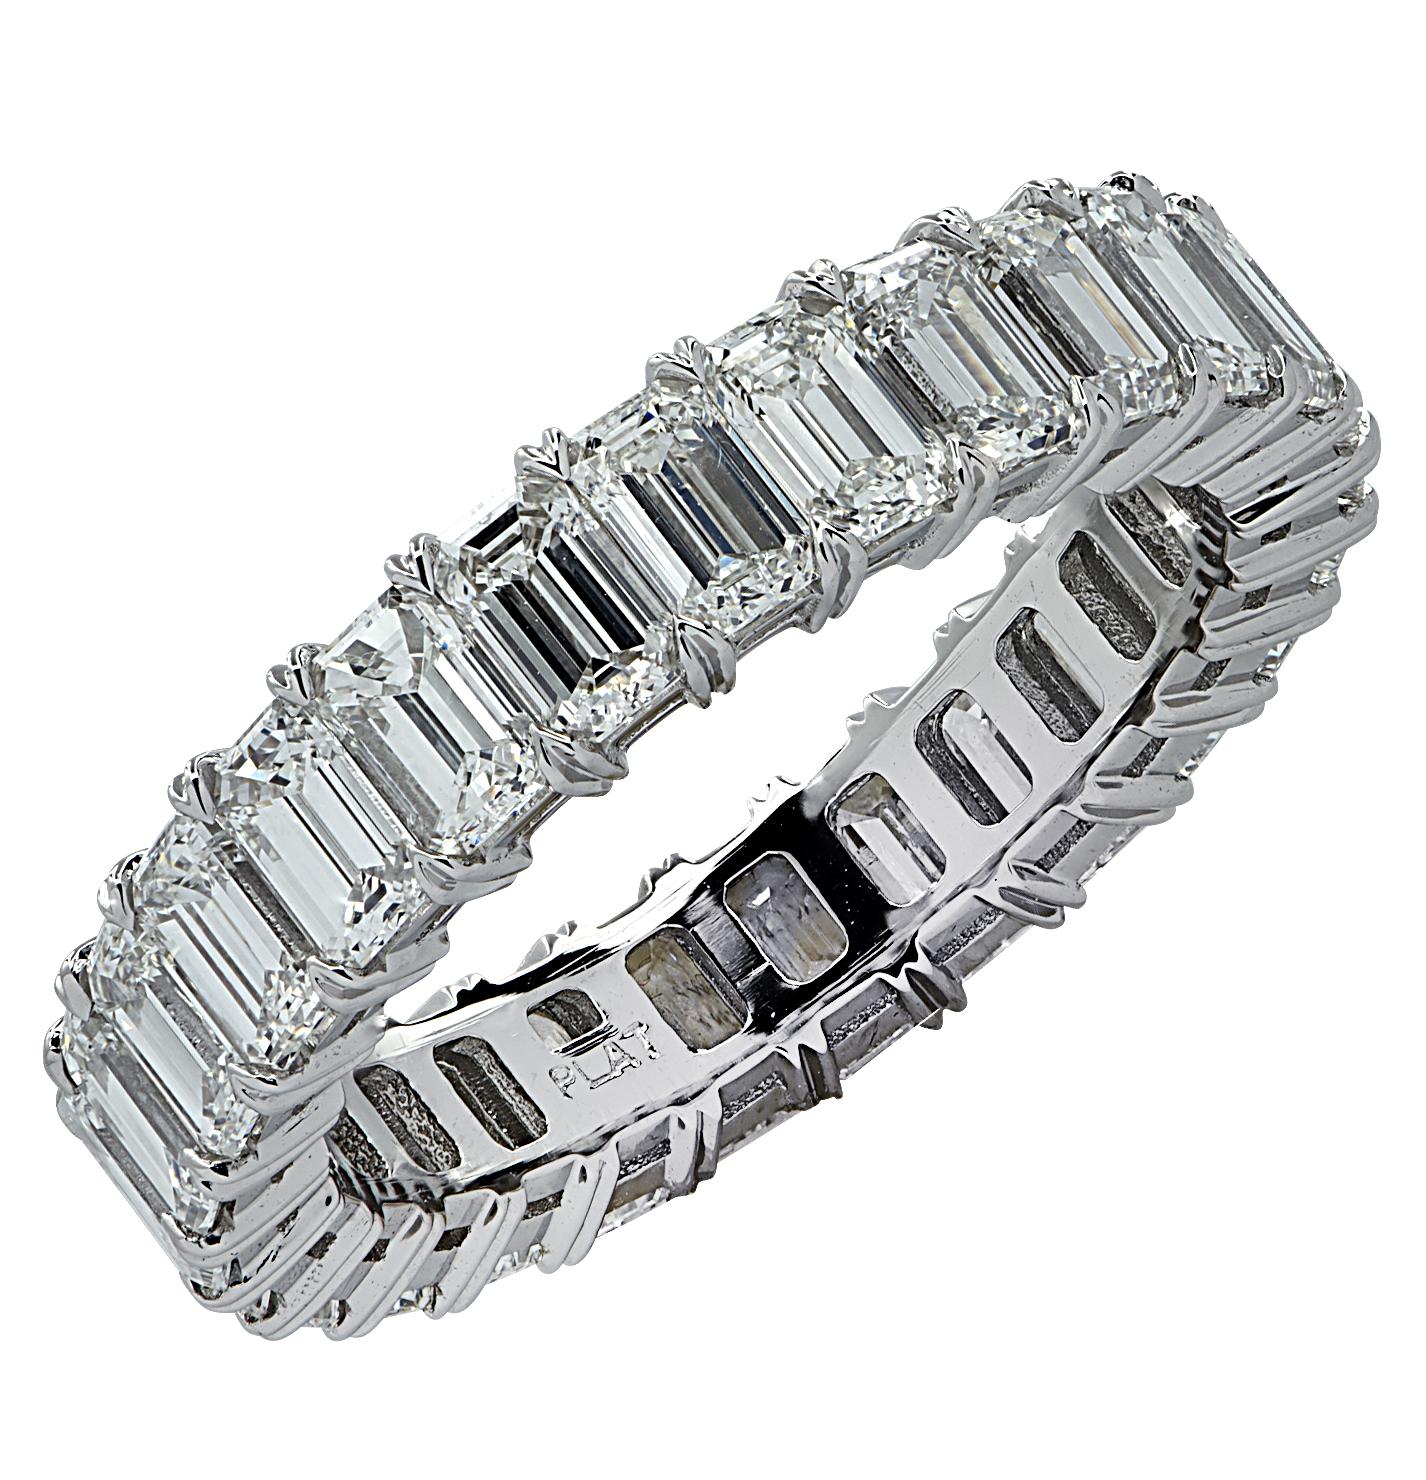 Exquisite Vivid Diamonds eternity band crafted by hand in Platinum, showcasing 27 stunning emerald cut diamonds weighing 3.88 carats total, E-F color, VS clarity. Each diamond is carefully selected, perfectly matched and set in a seamless sea of